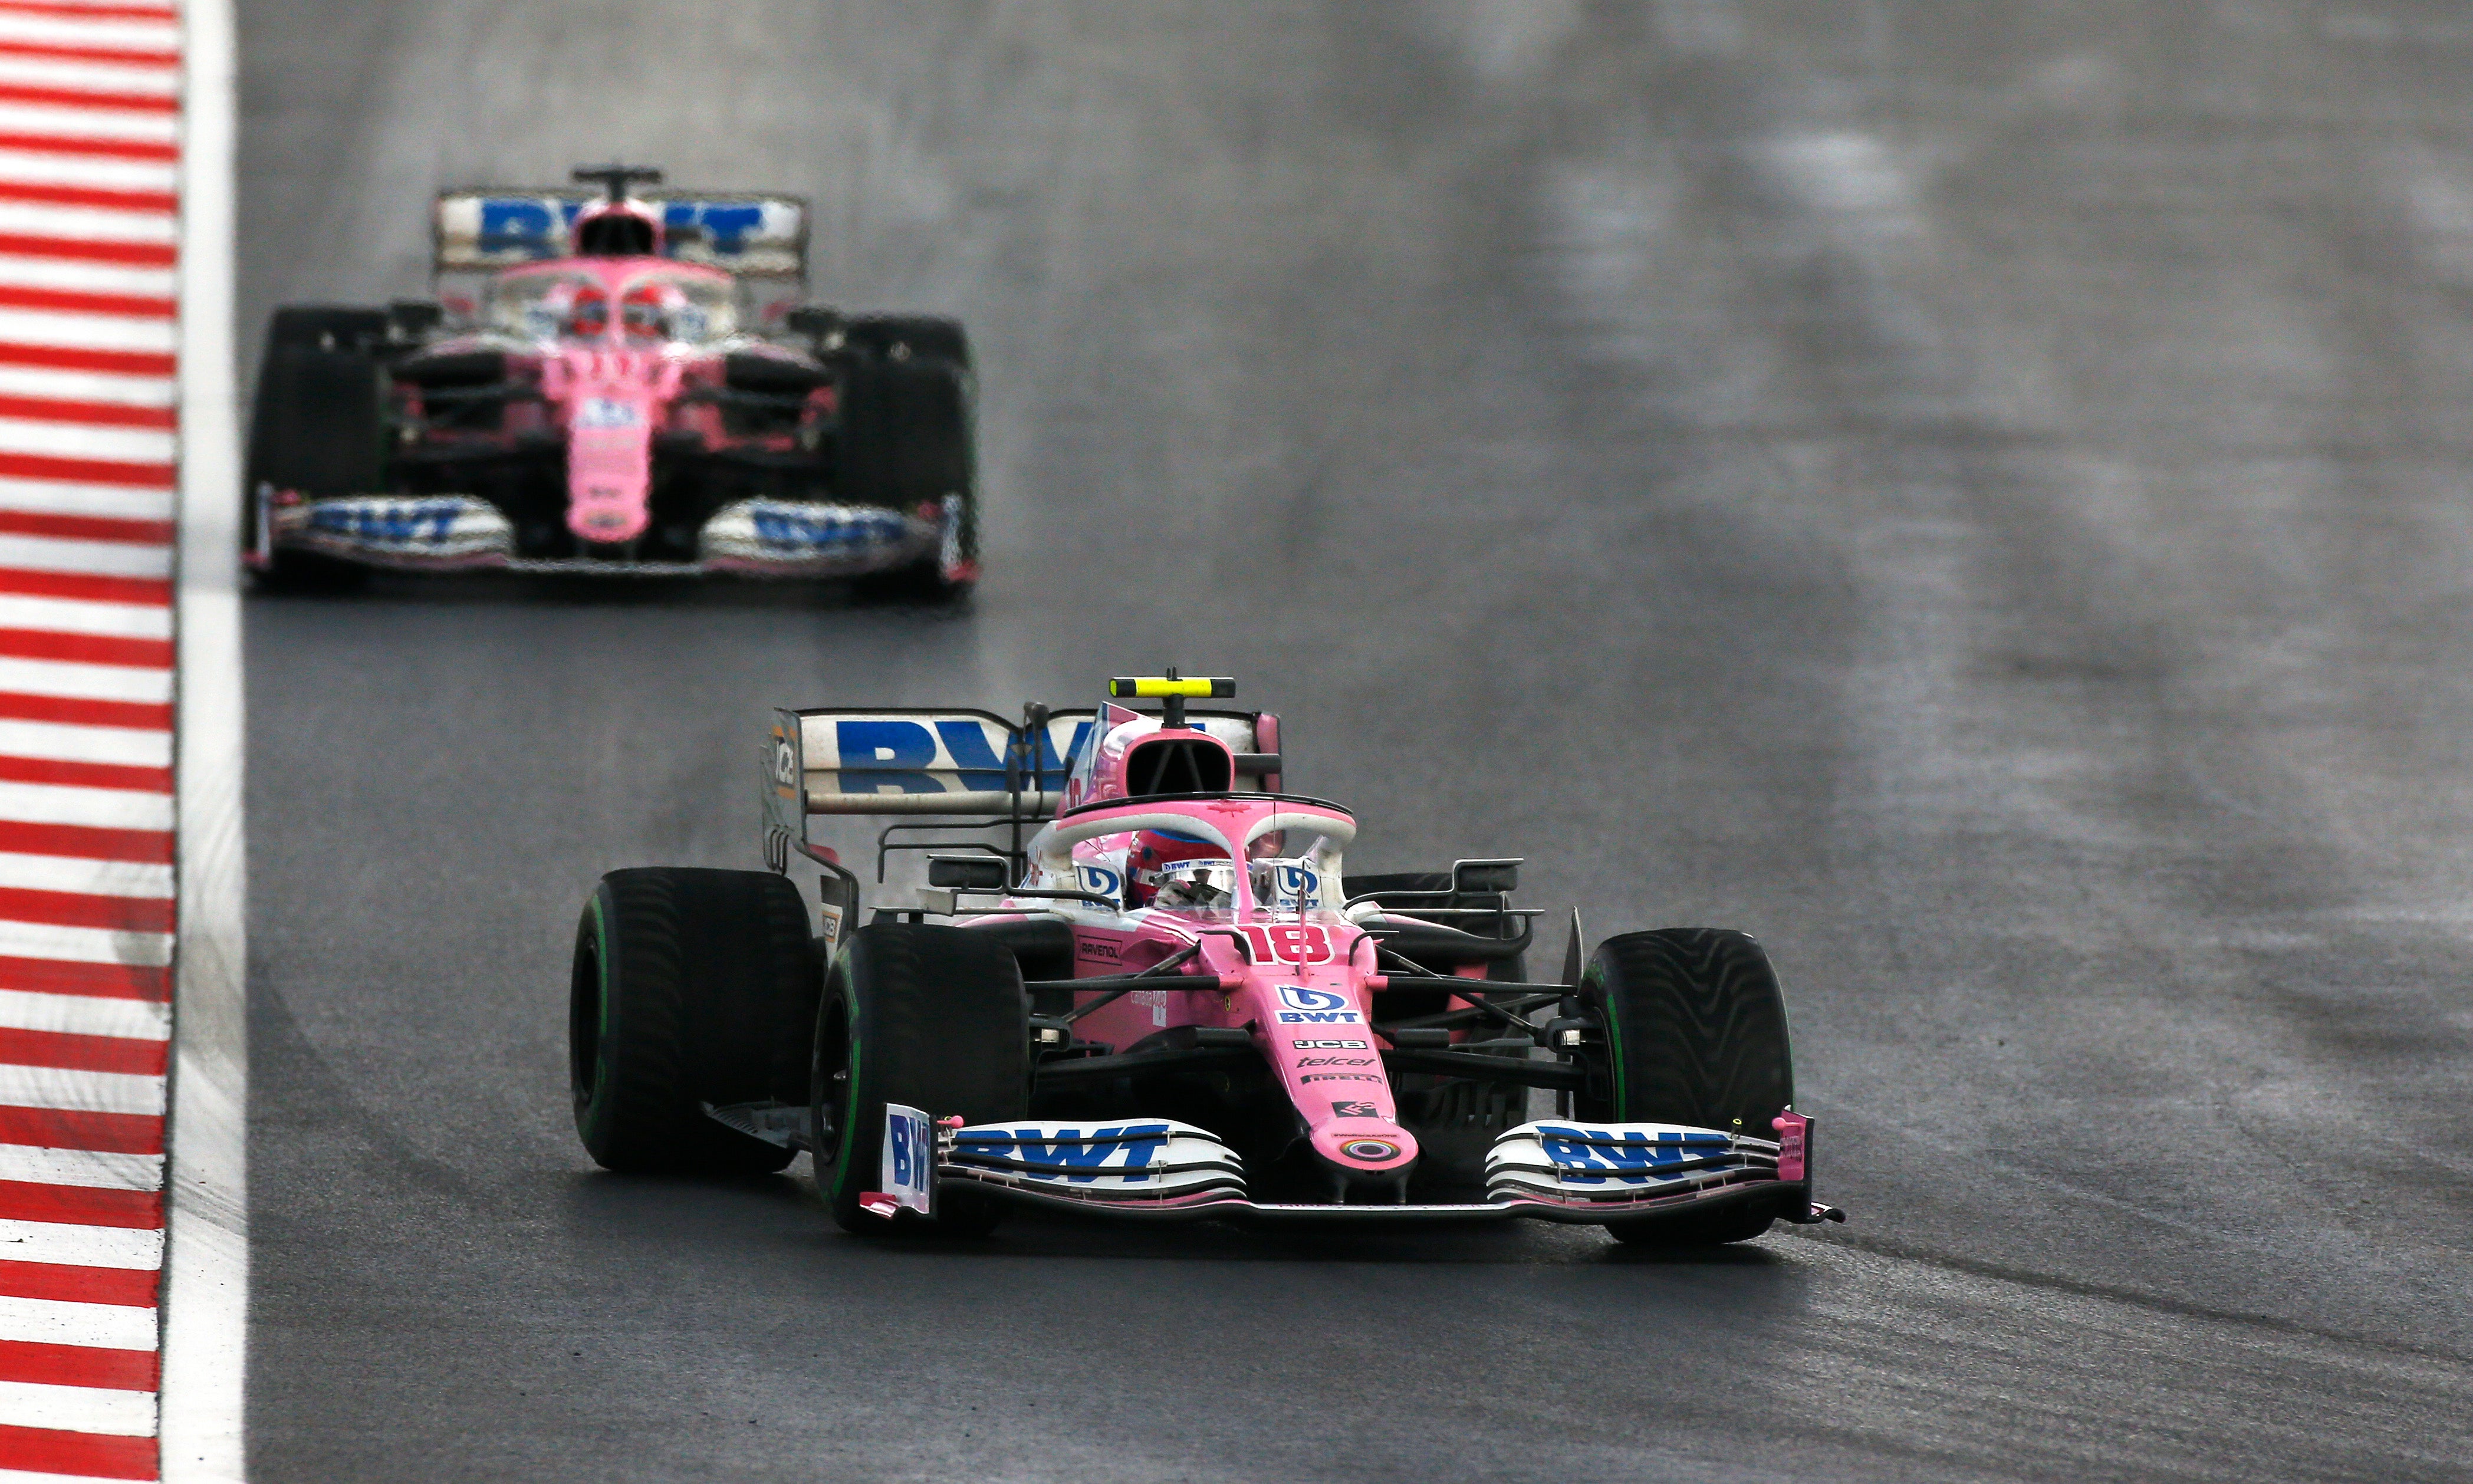 Lance Stroll drove superbly until a damaged front wing wrecked his chances of winning